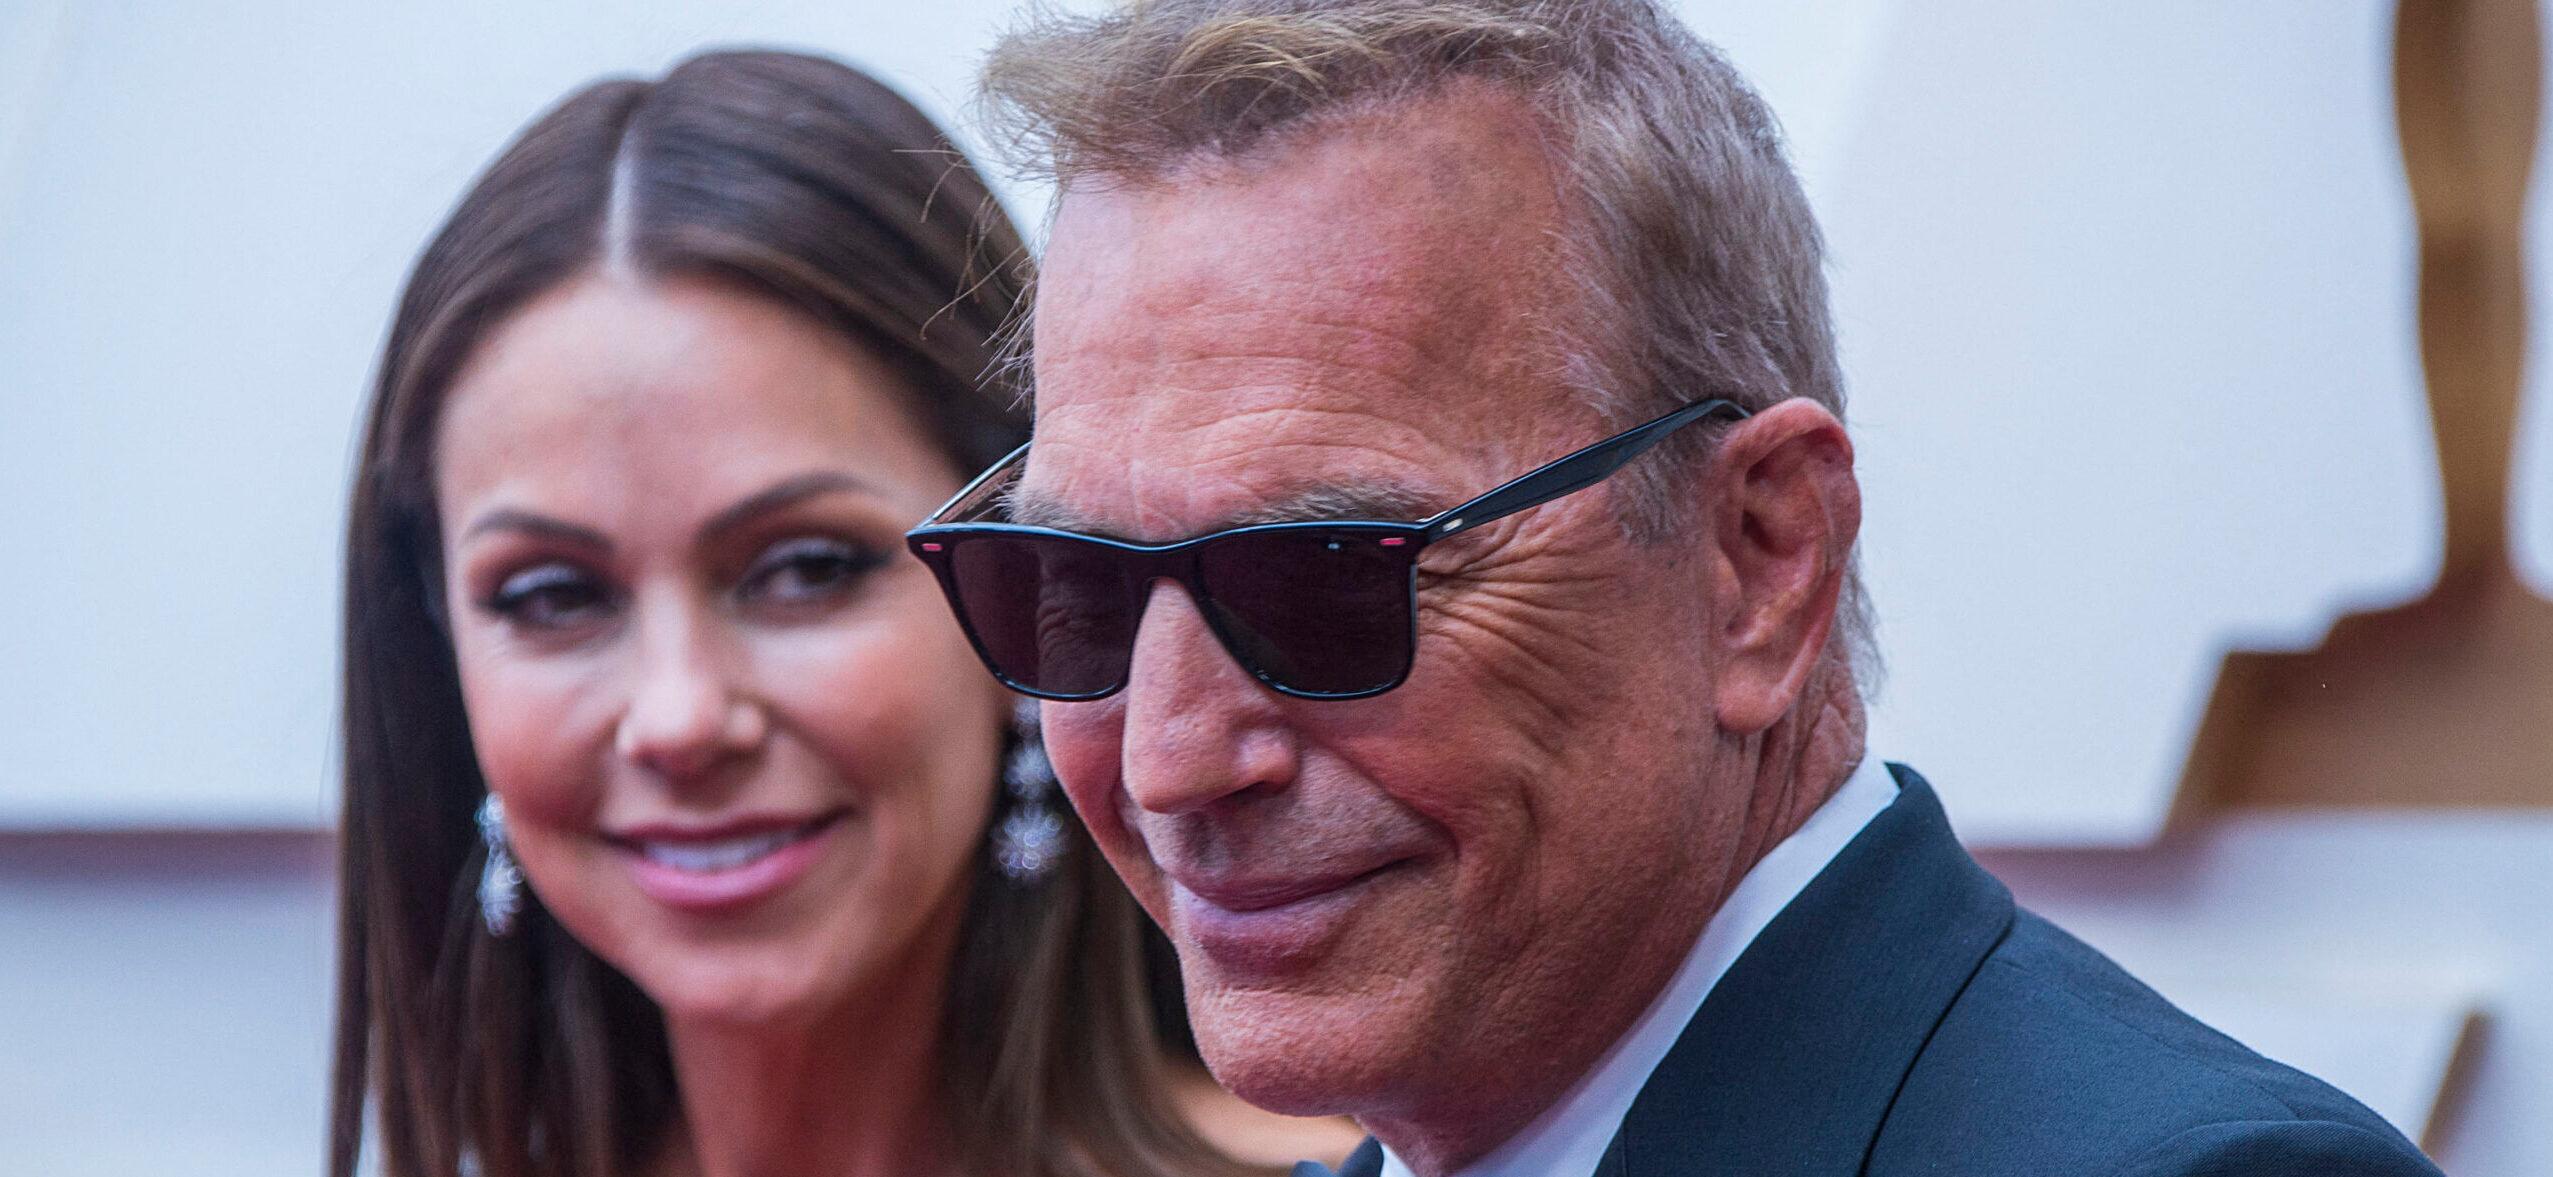 Kevin Costner Finally Gets His Wish As Estranged Wife Moves Out!